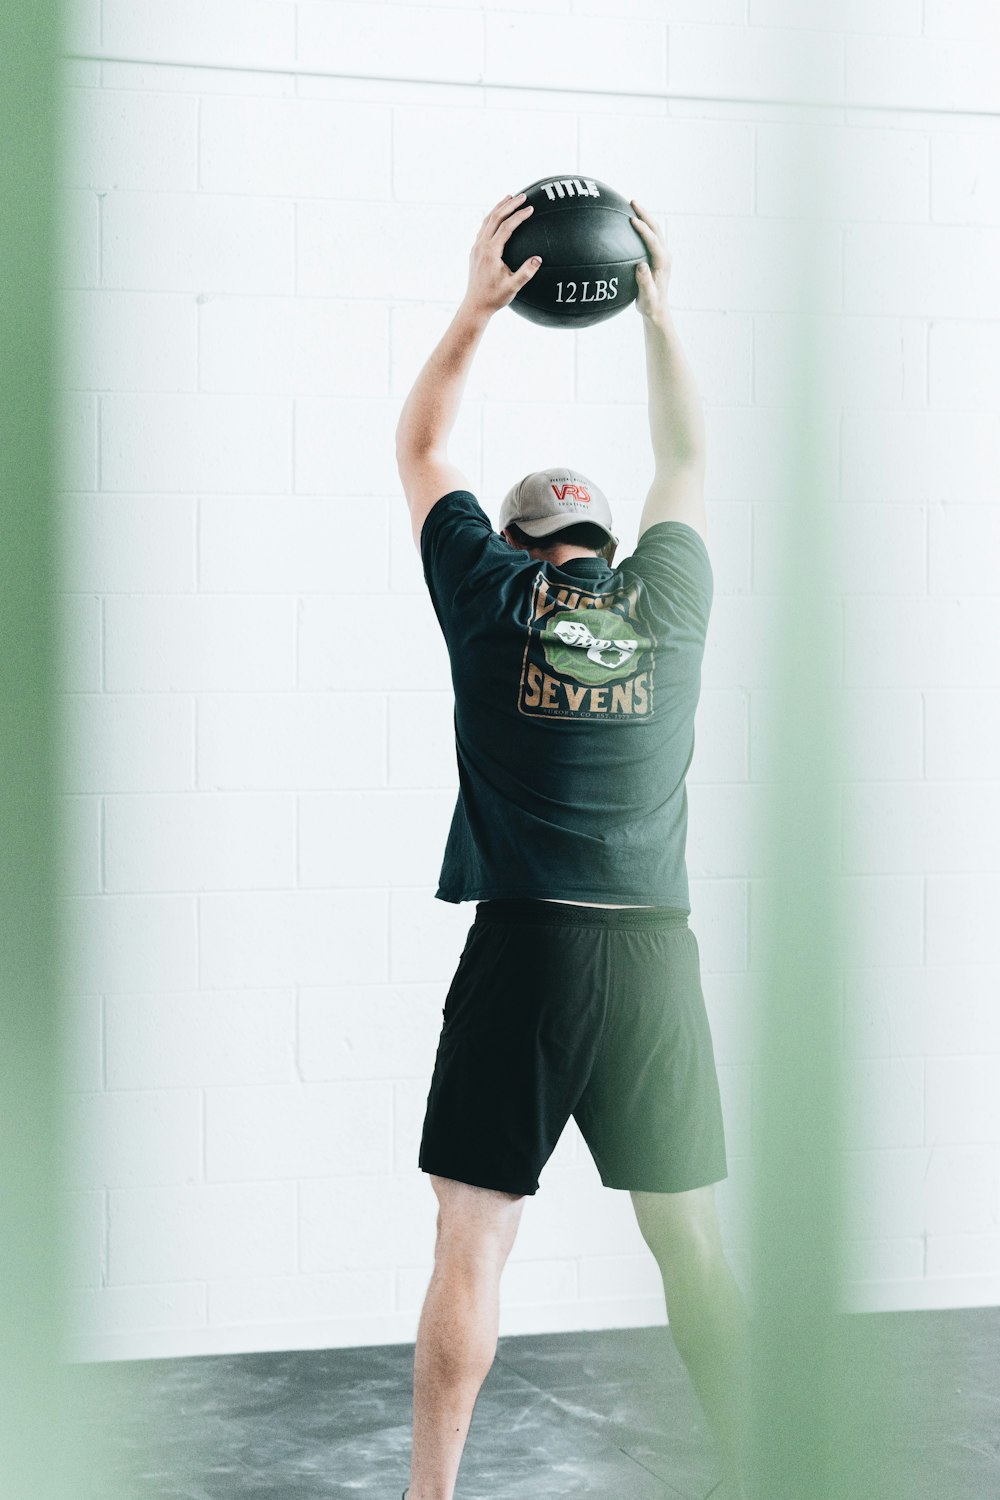 man in green crew neck t-shirt and black shorts holding black and white basketball